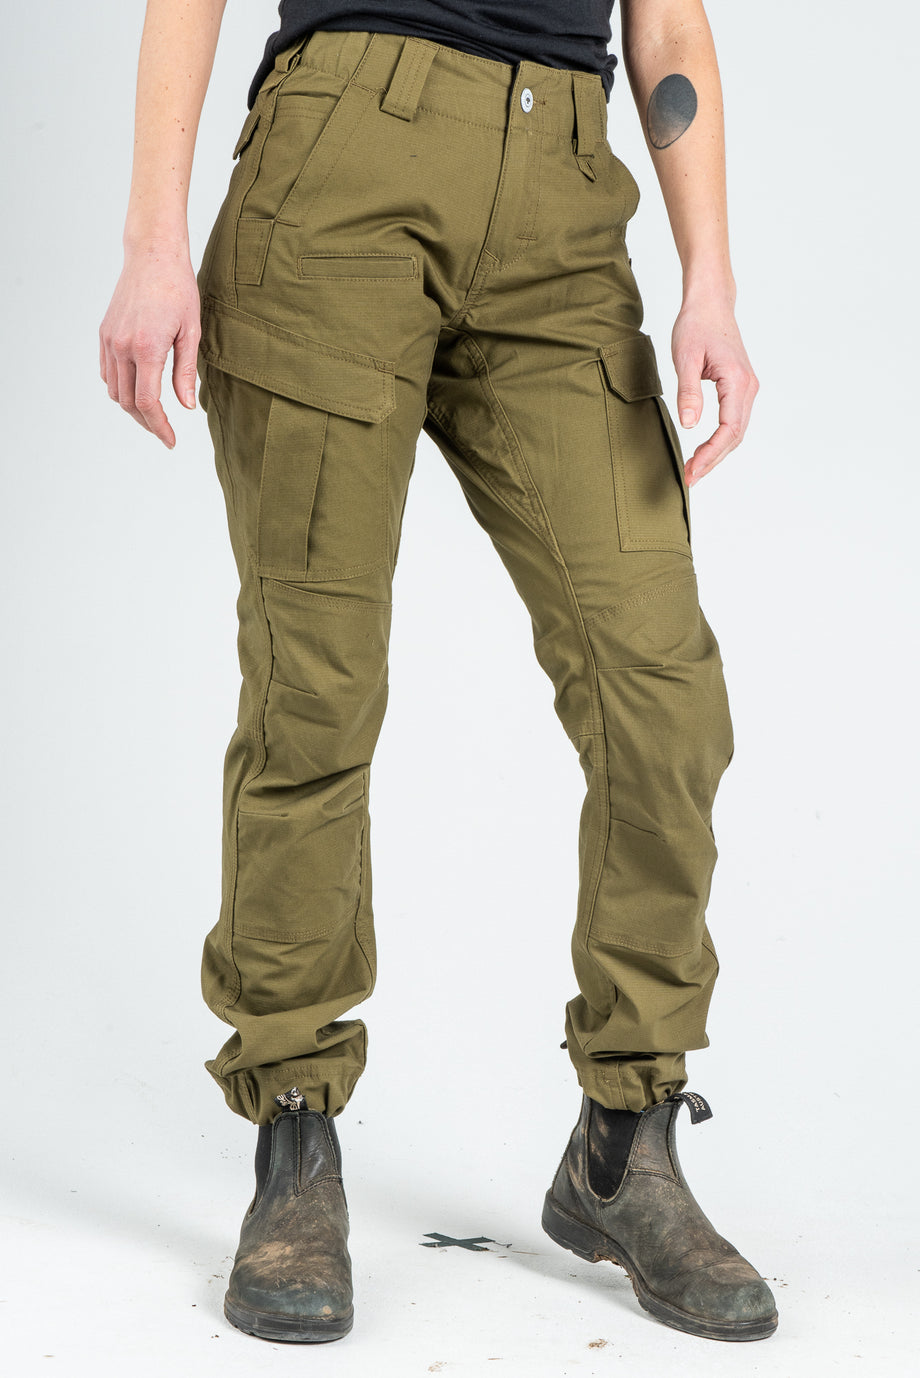 Buy Olive Trousers & Pants for Women by FOUNDRY Online